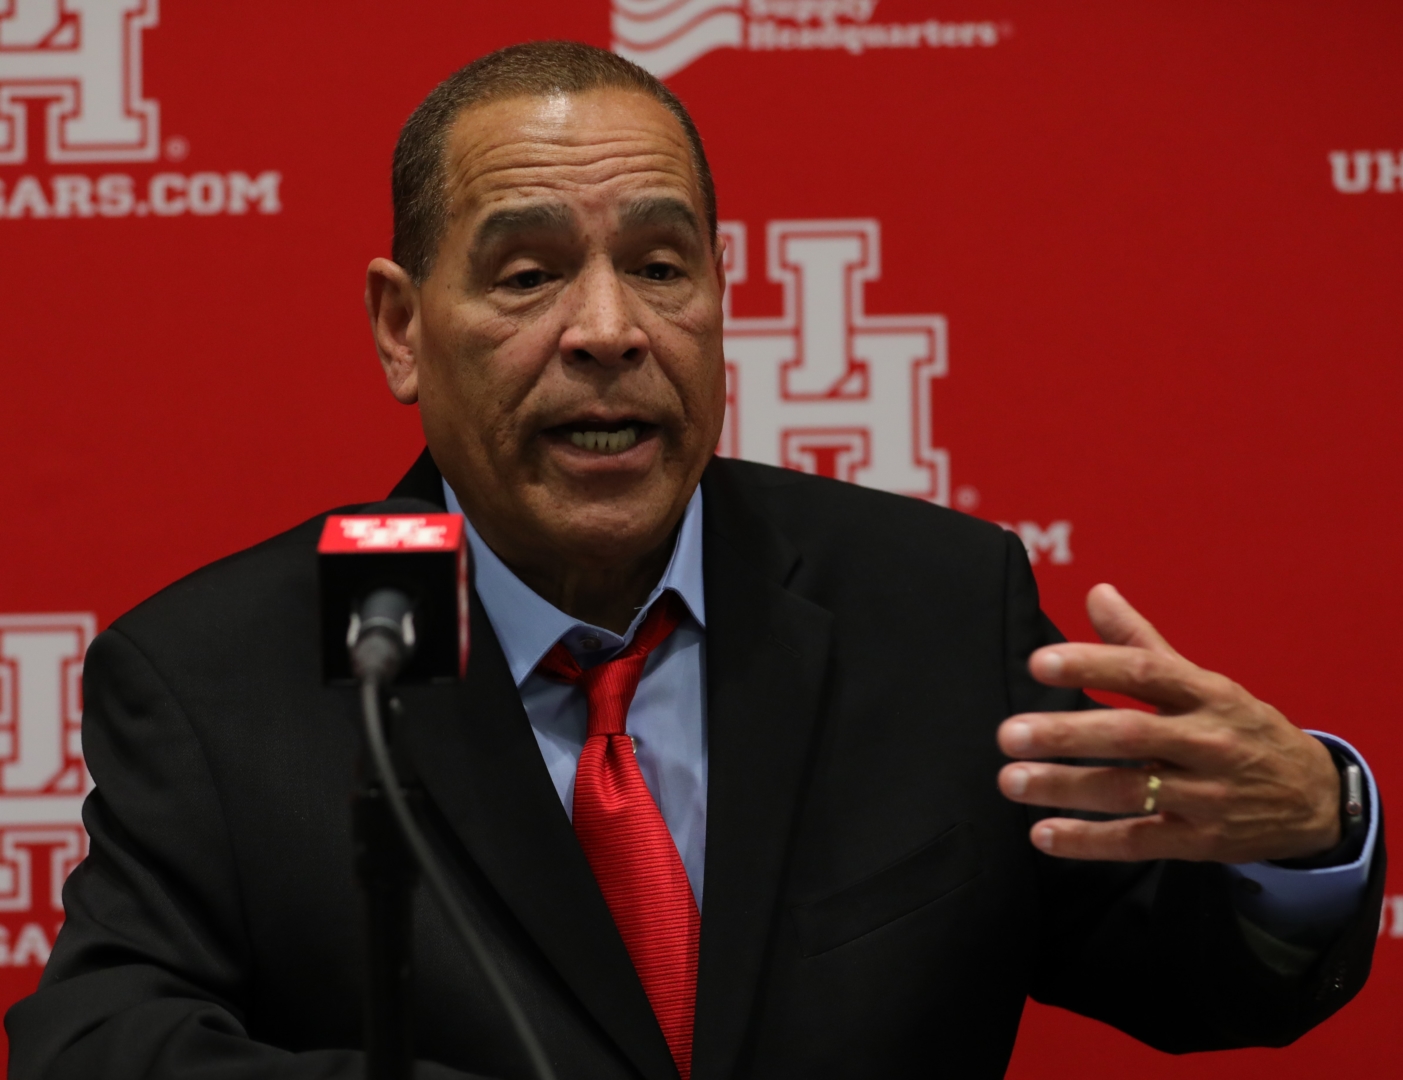 UH head coach Kelvin Sampson answers a question from the media following a 75-62 win against Tulane during the 2019-20 season. | Mikol Kindle Jr./The Cougar